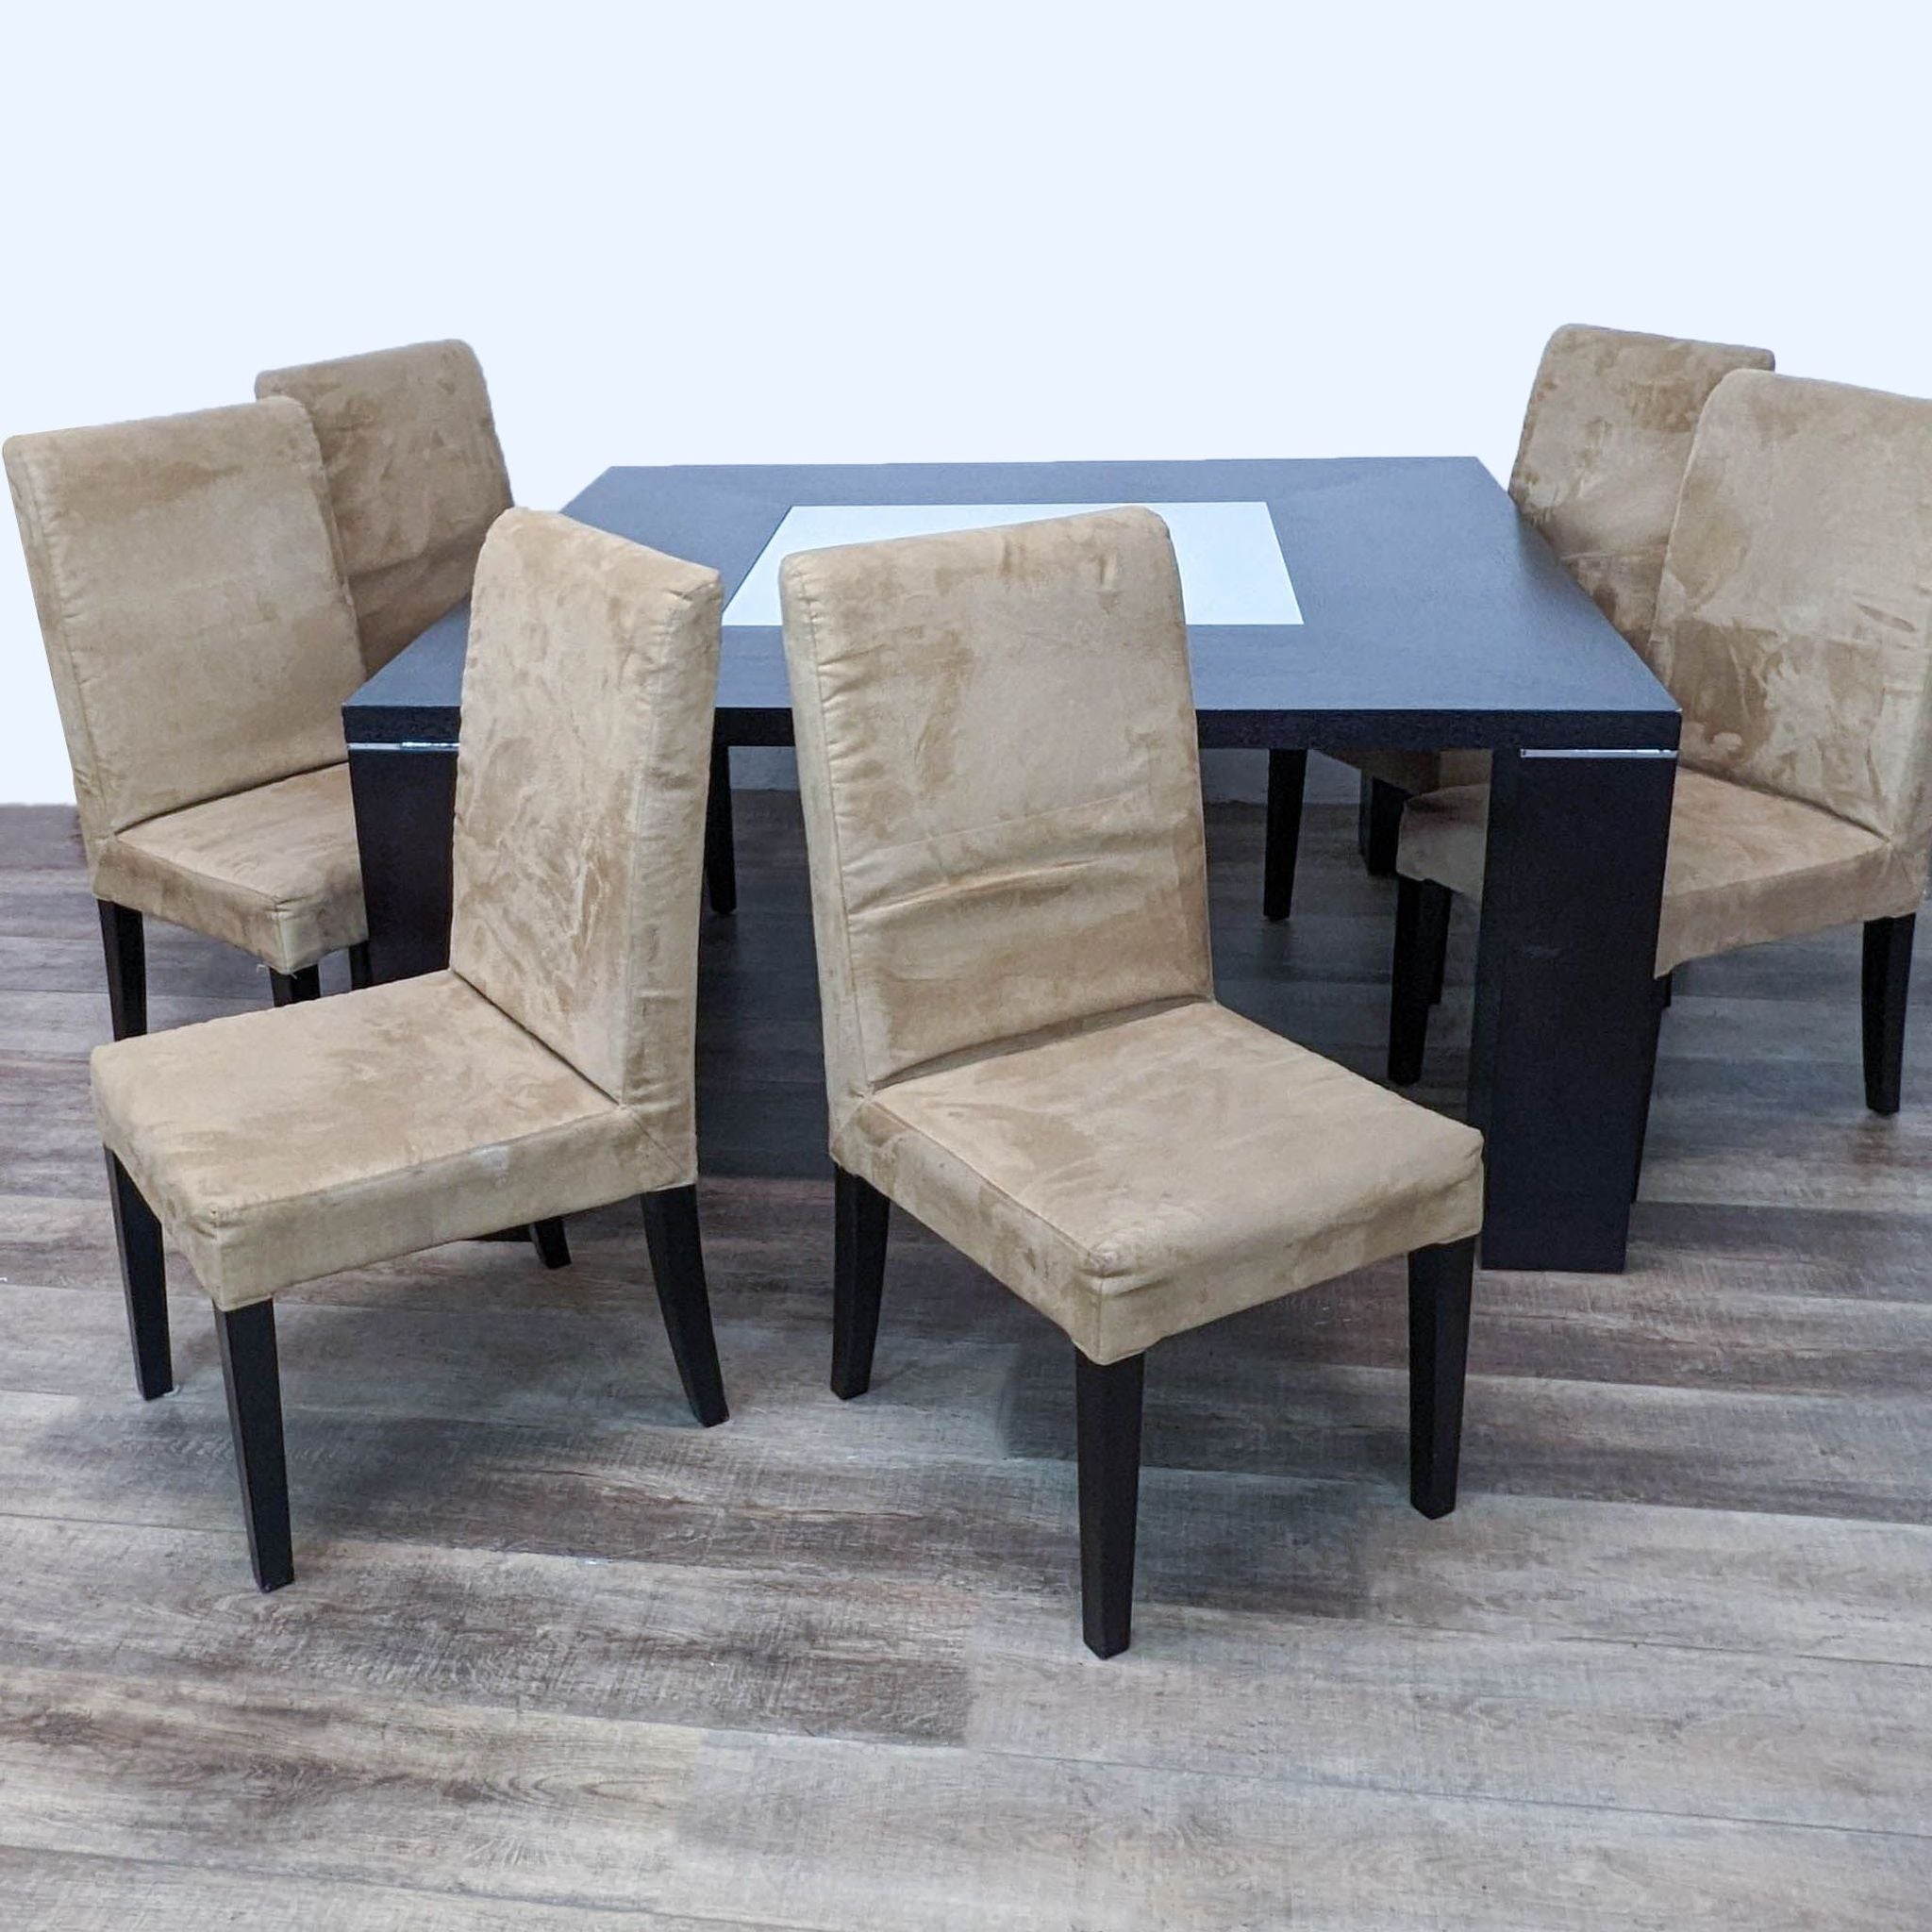 1. Sharelle Elite 7-piece dining set with a wenge-finished wood veneer table with block legs, chrome accents, a sand blasted glass insert, and six taupe microfiber chairs.